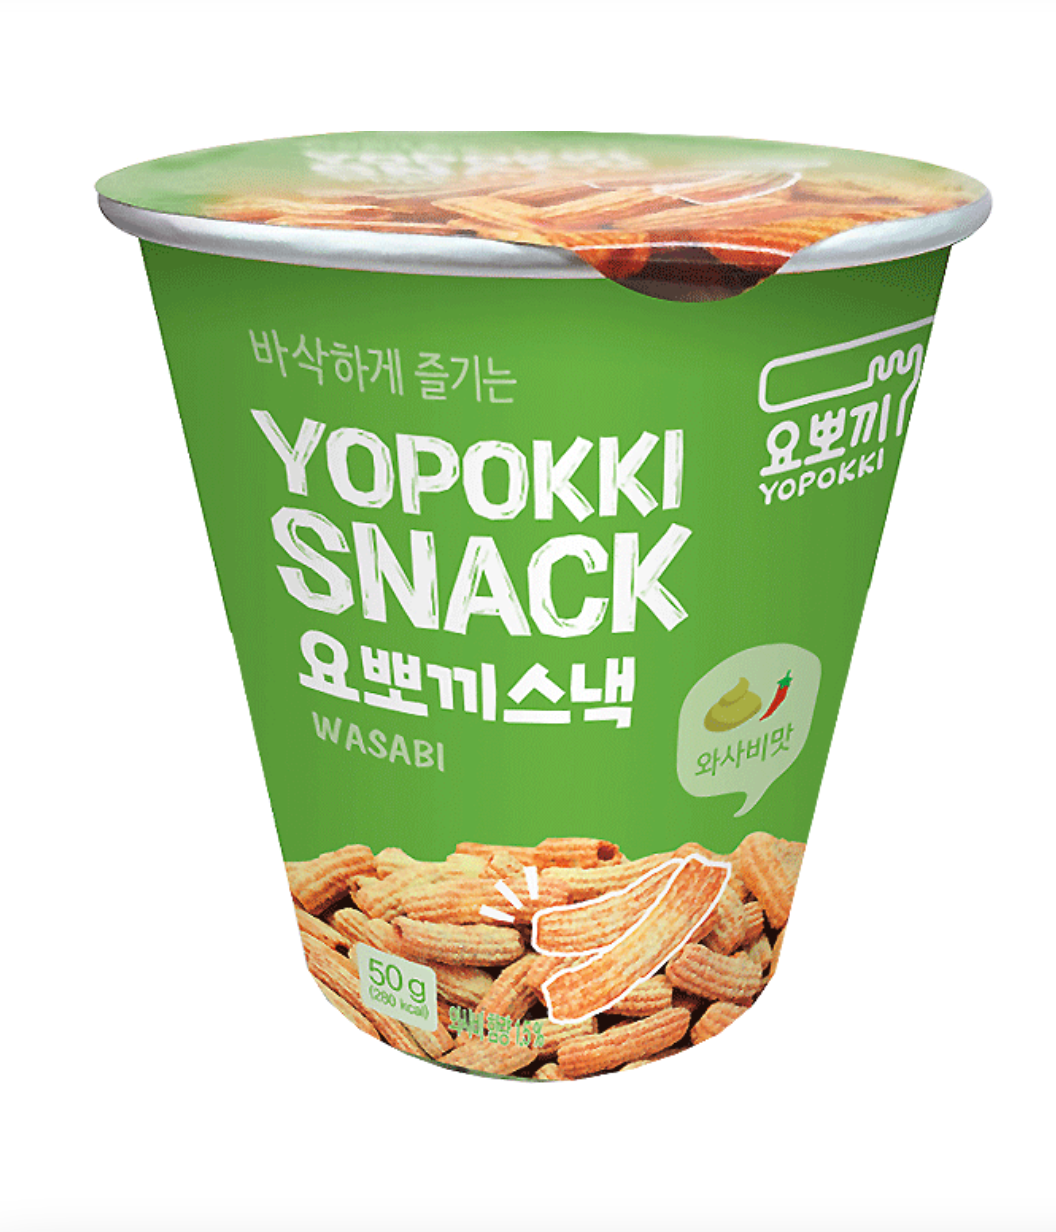 YOUNGPOONG Yopokki Snack Wasabi  50g (12 Pack)-Z42/43/44